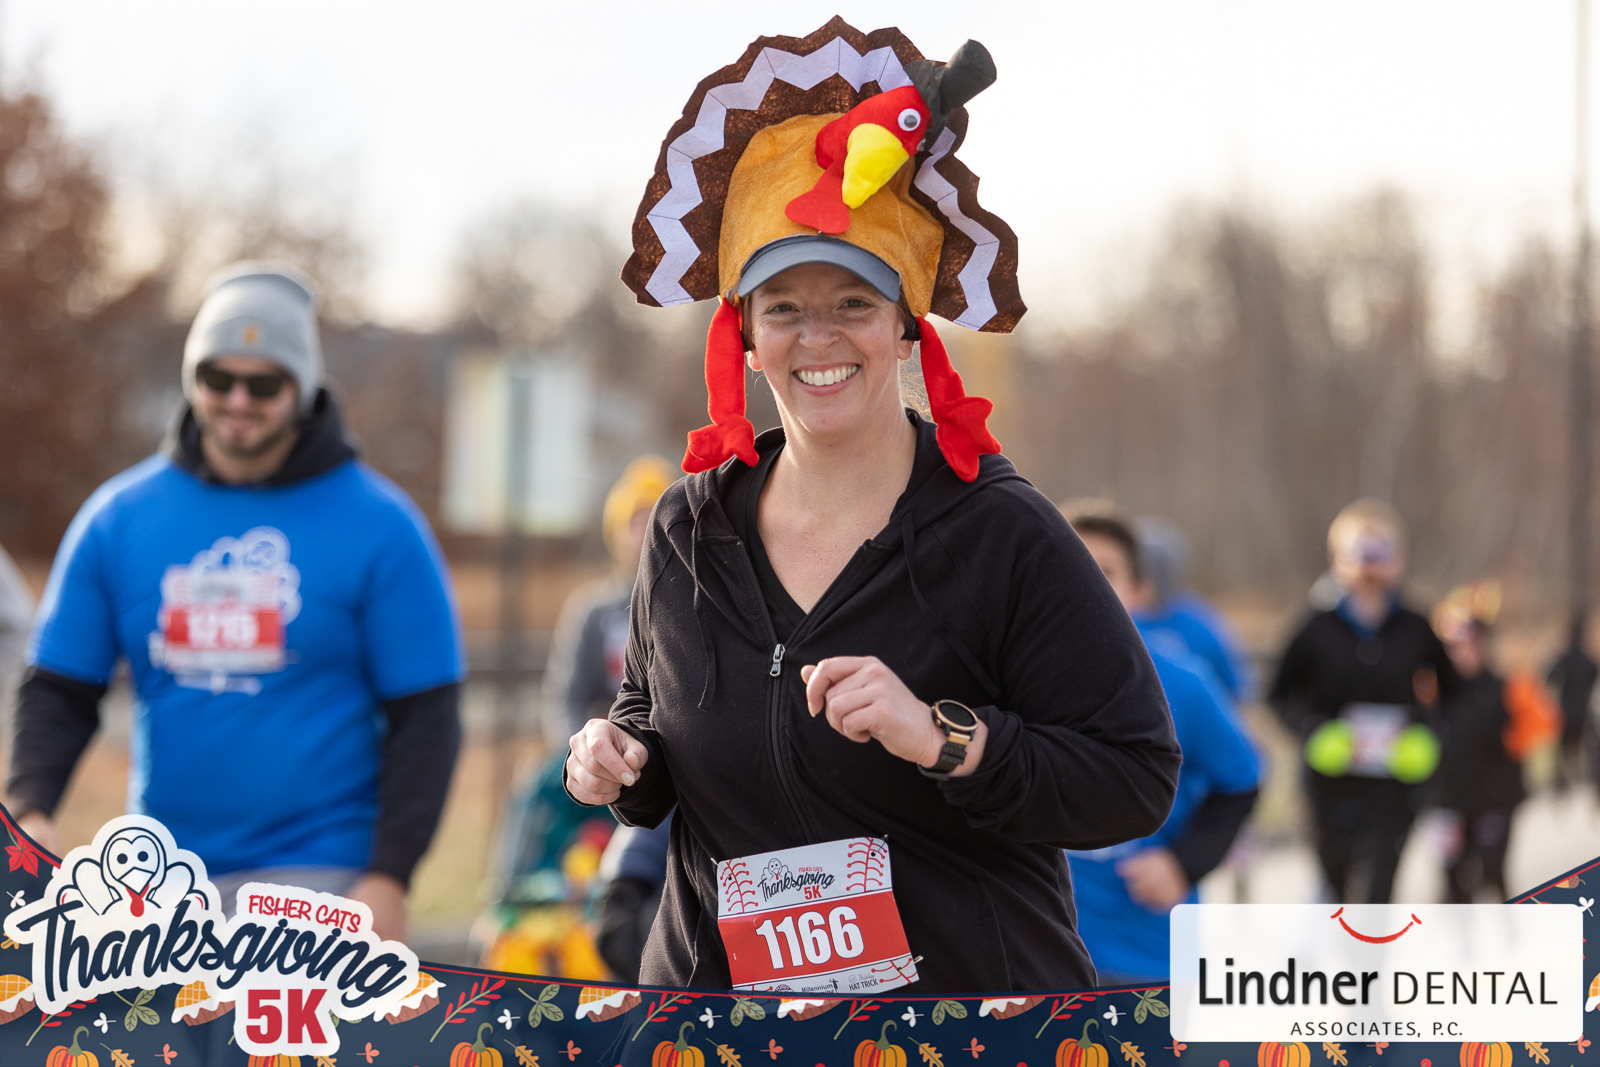 PHOTOS: NH Fisher Cats Thanksgiving 5k – 2021